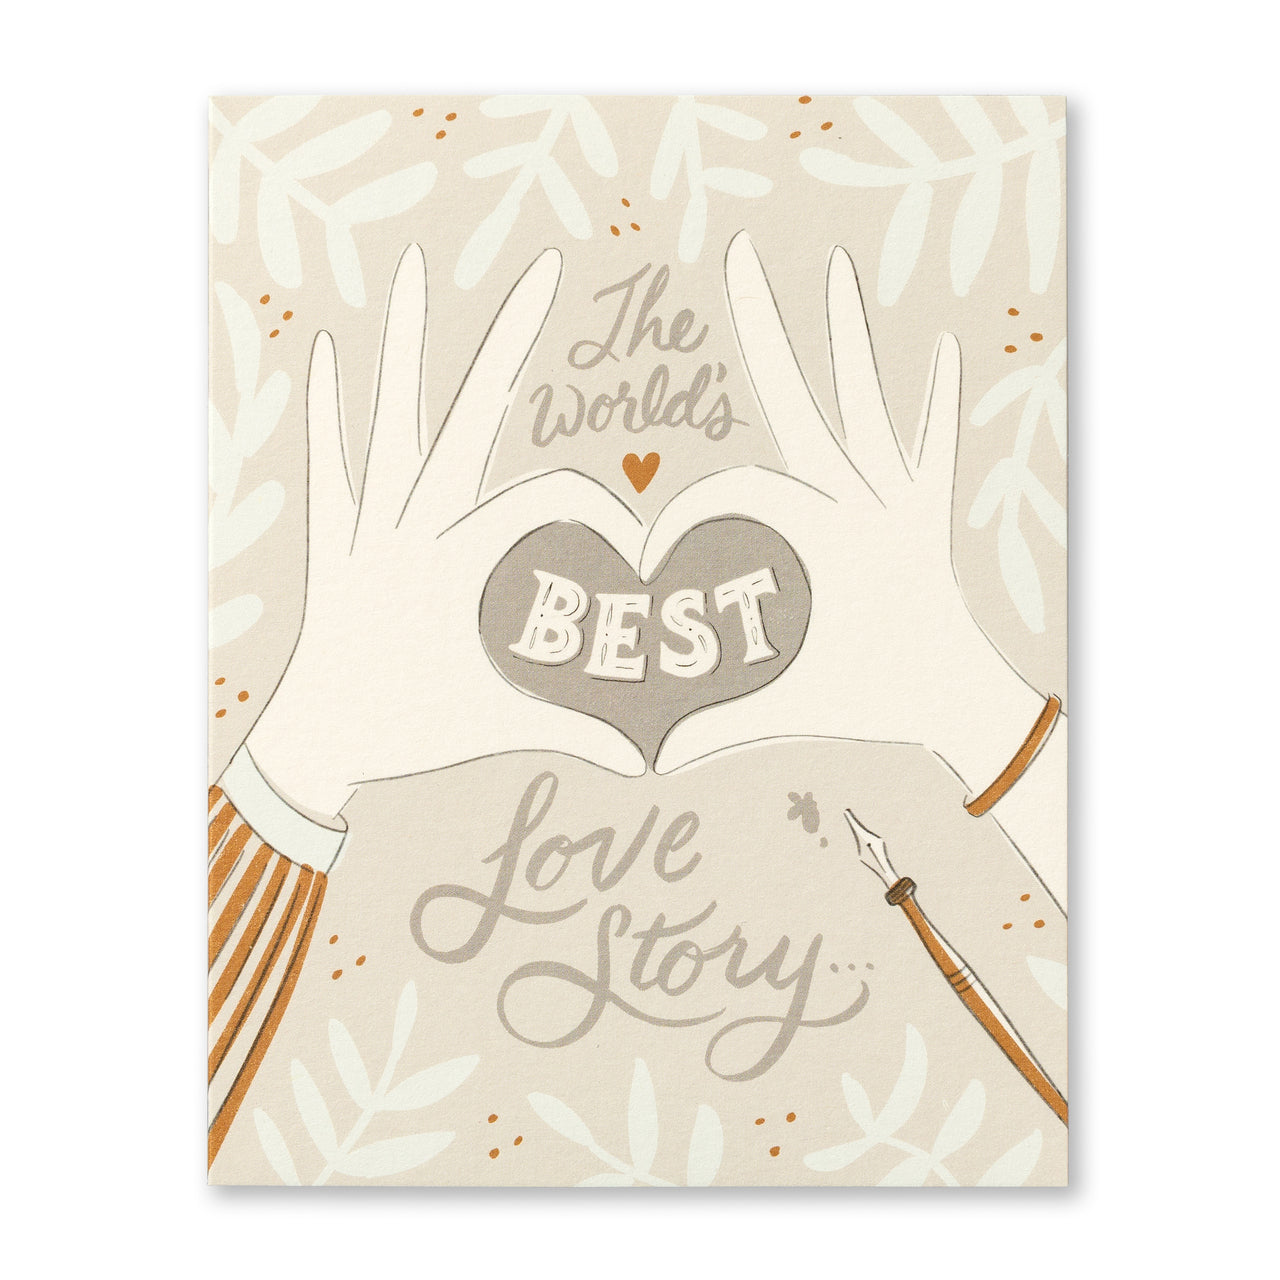 Love Muchly Greeting Card - Wedding - The World's Best Love Story... - Mellow Monkey